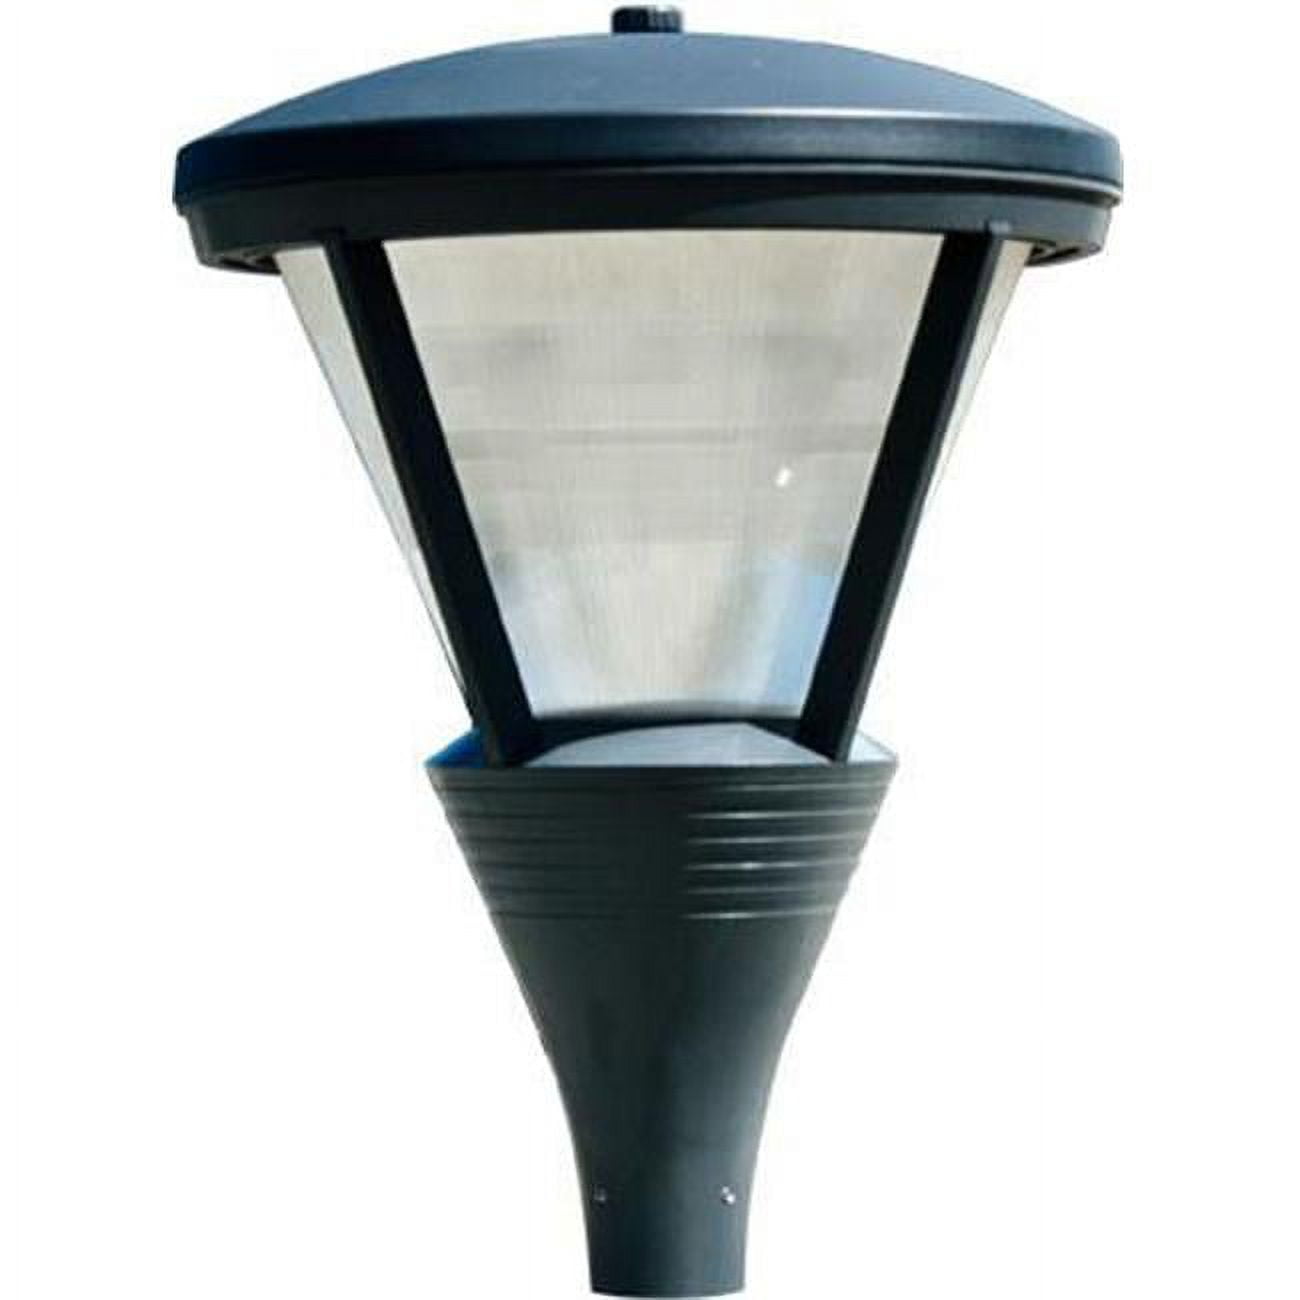 Picture of Dabmar Lighting GM587-B-MT Powder Coated Cast Aluminum Architectural Post Top Light Fixture, Black - 34.50 x 25.25 x 25.25 in.